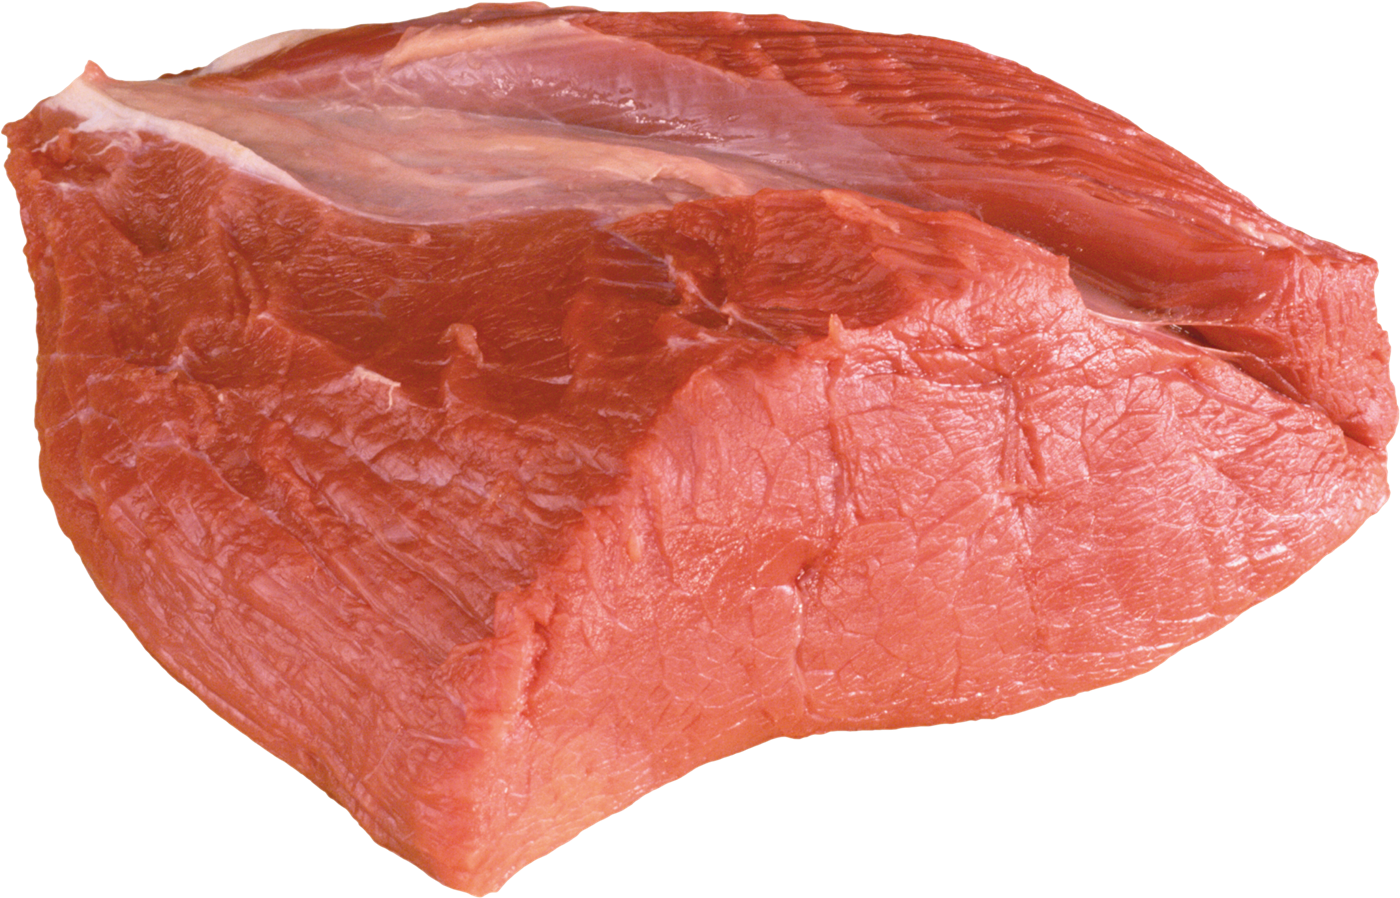 Beef Meat PNG Free Image